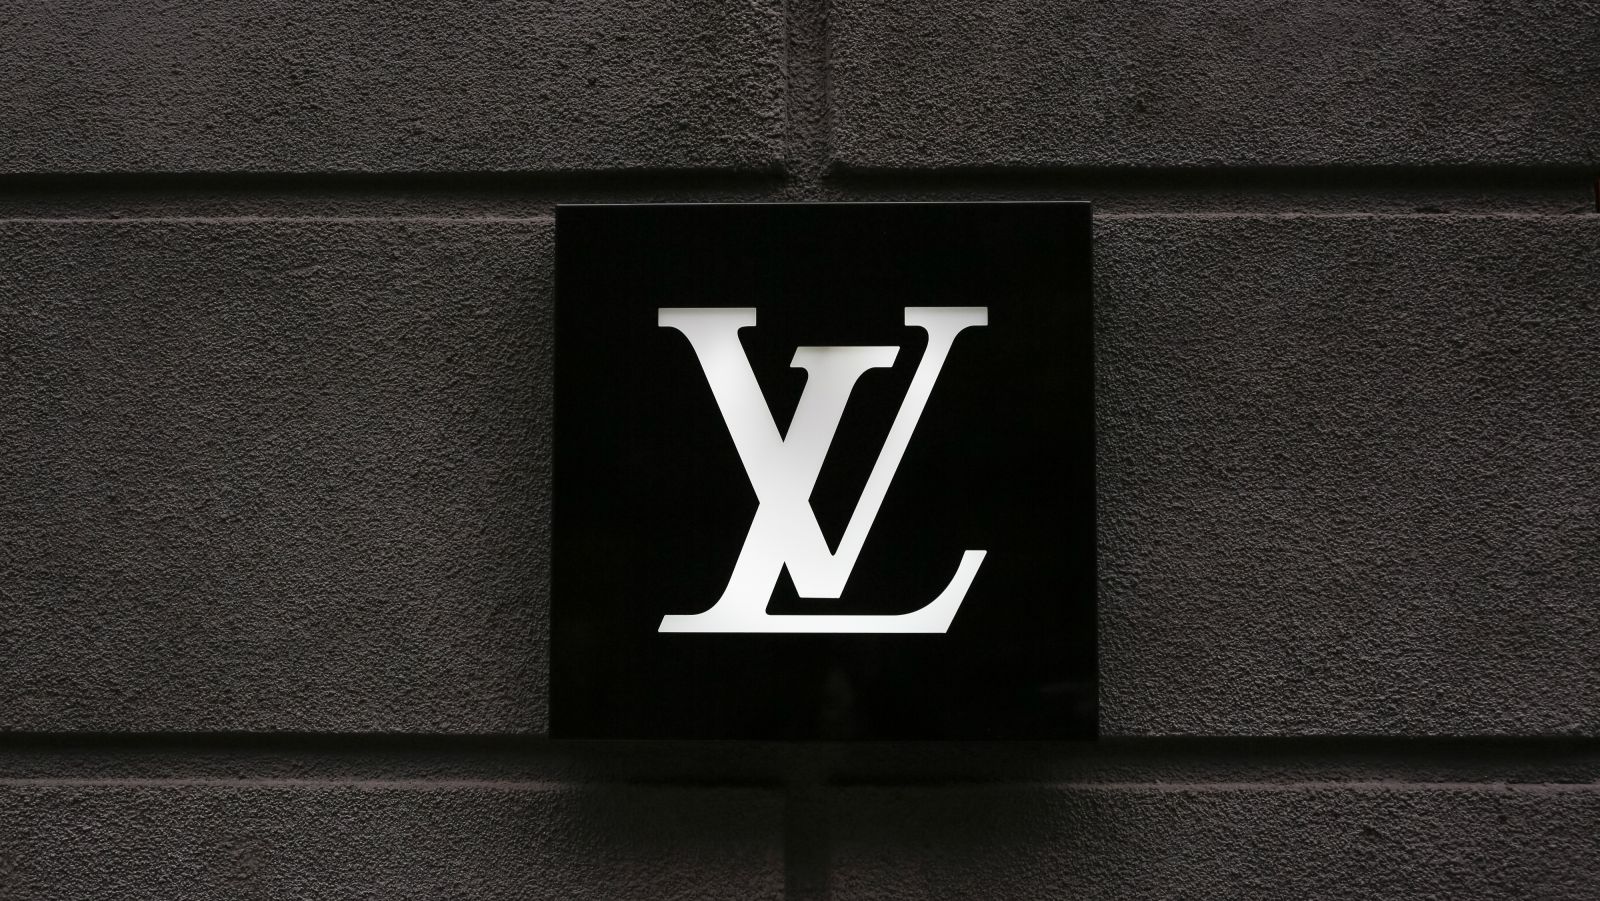 Louis Vuitton soon to get Made in India tag - Luxurylaunches